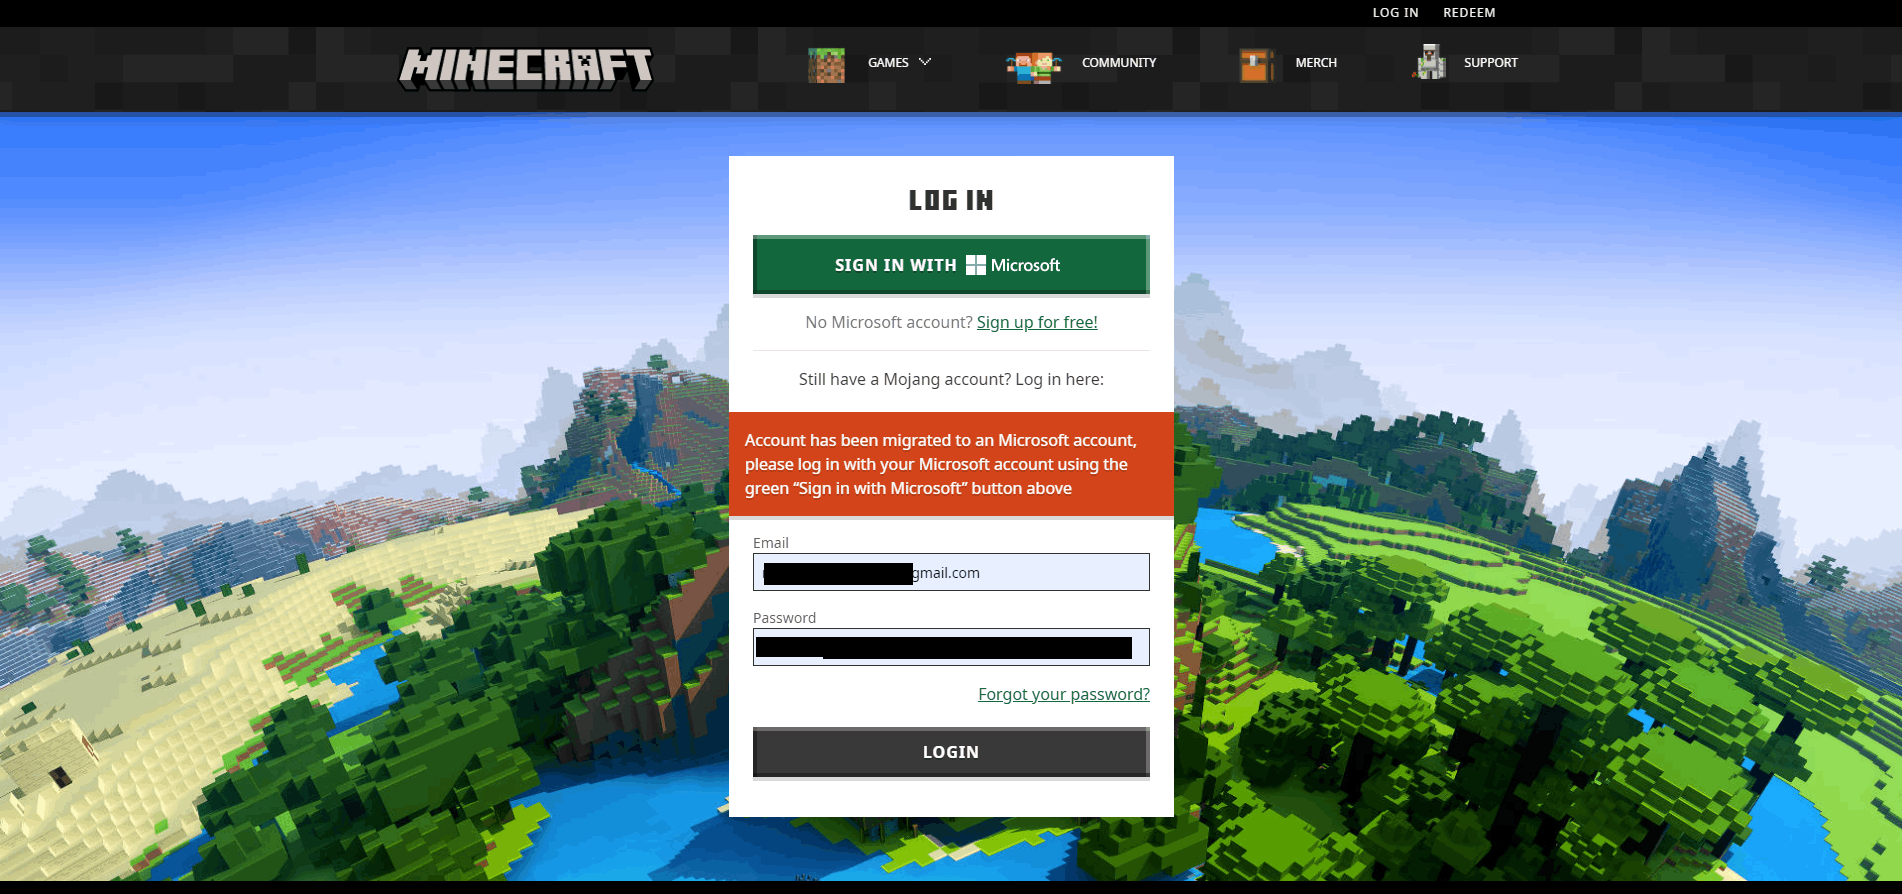 Minecraft Microsoft Account Requirement Announced by Mojang